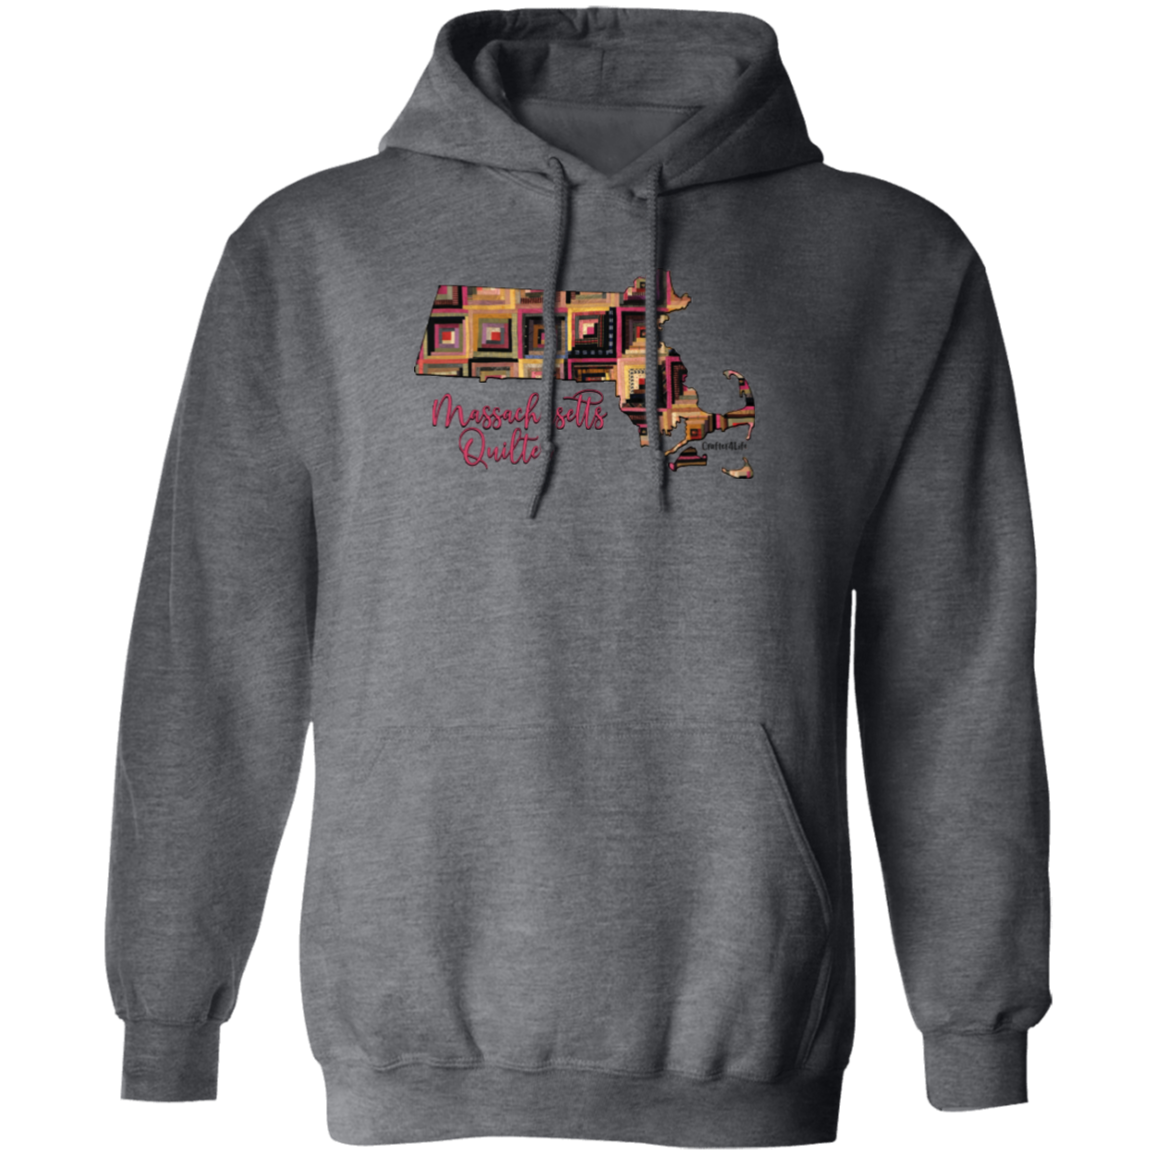 Massachussetts Quilter Pullover Hoodie, Gift for Quilting Friends and Family